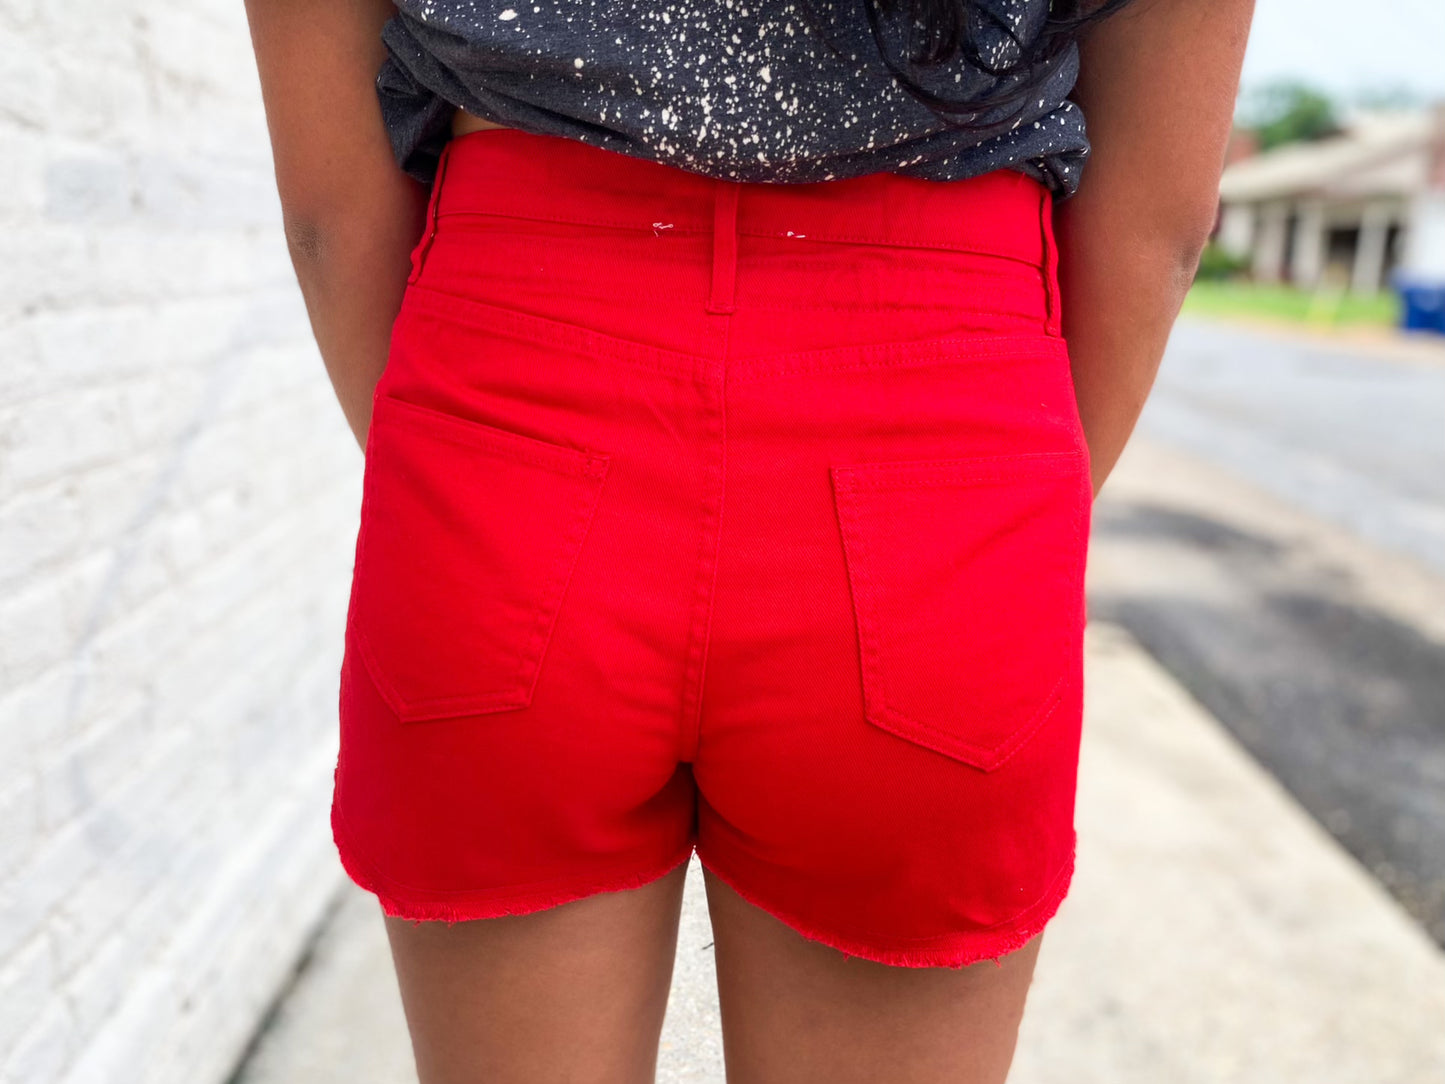 On The Bright Side Shorts RED *FINAL SALE*